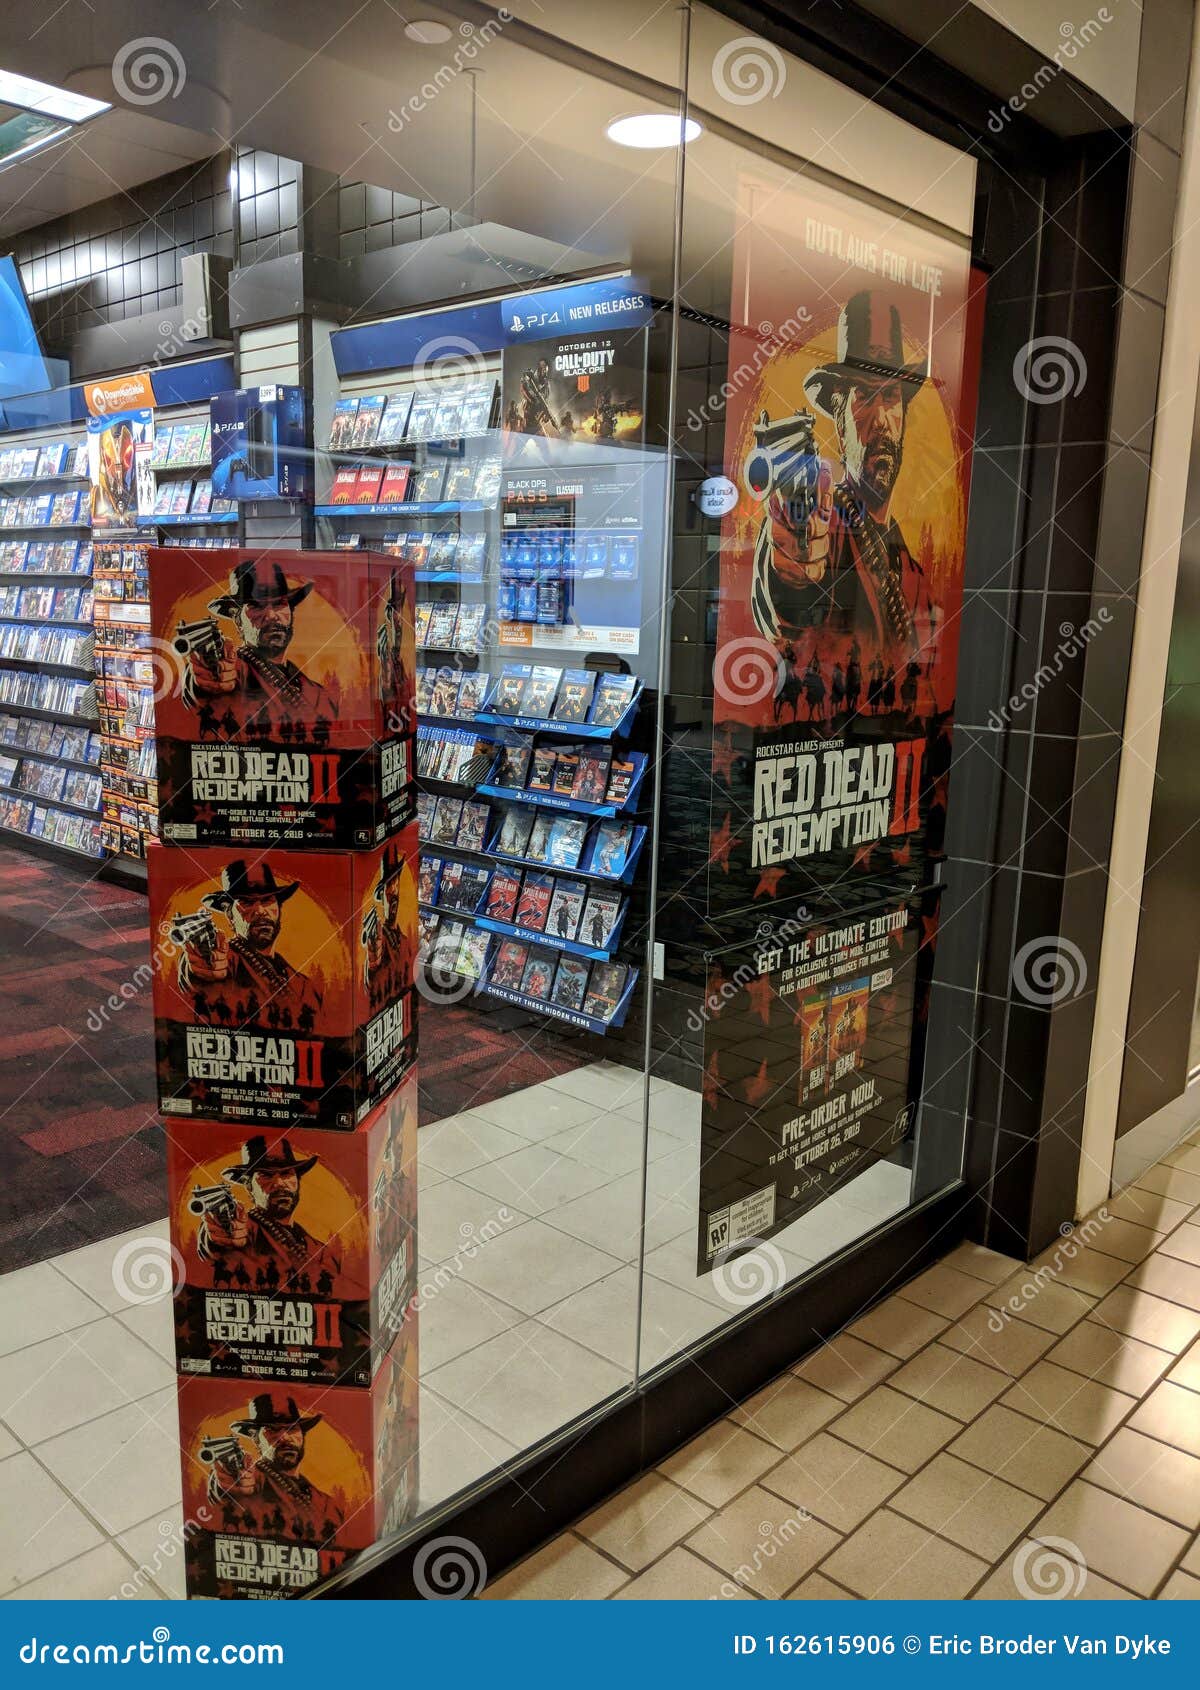 Redemption Display in Gamestop Store Editorial Photo - Image of xbox, game: 162615906